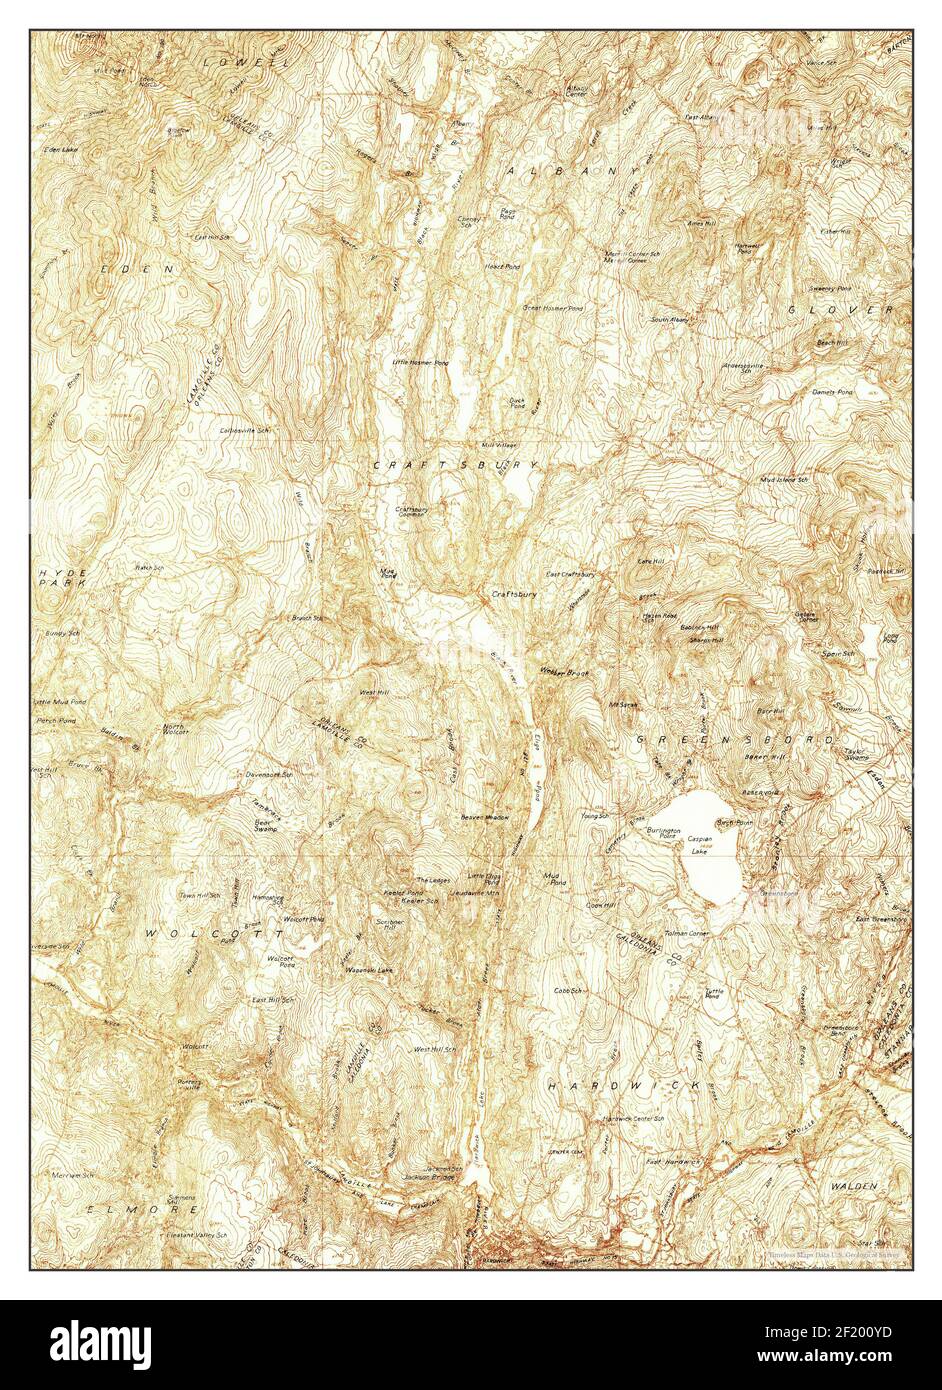 Hardwick, Vermont, map 1934, 1:48000, United States of America by Timeless Maps, data U.S. Geological Survey Stock Photo